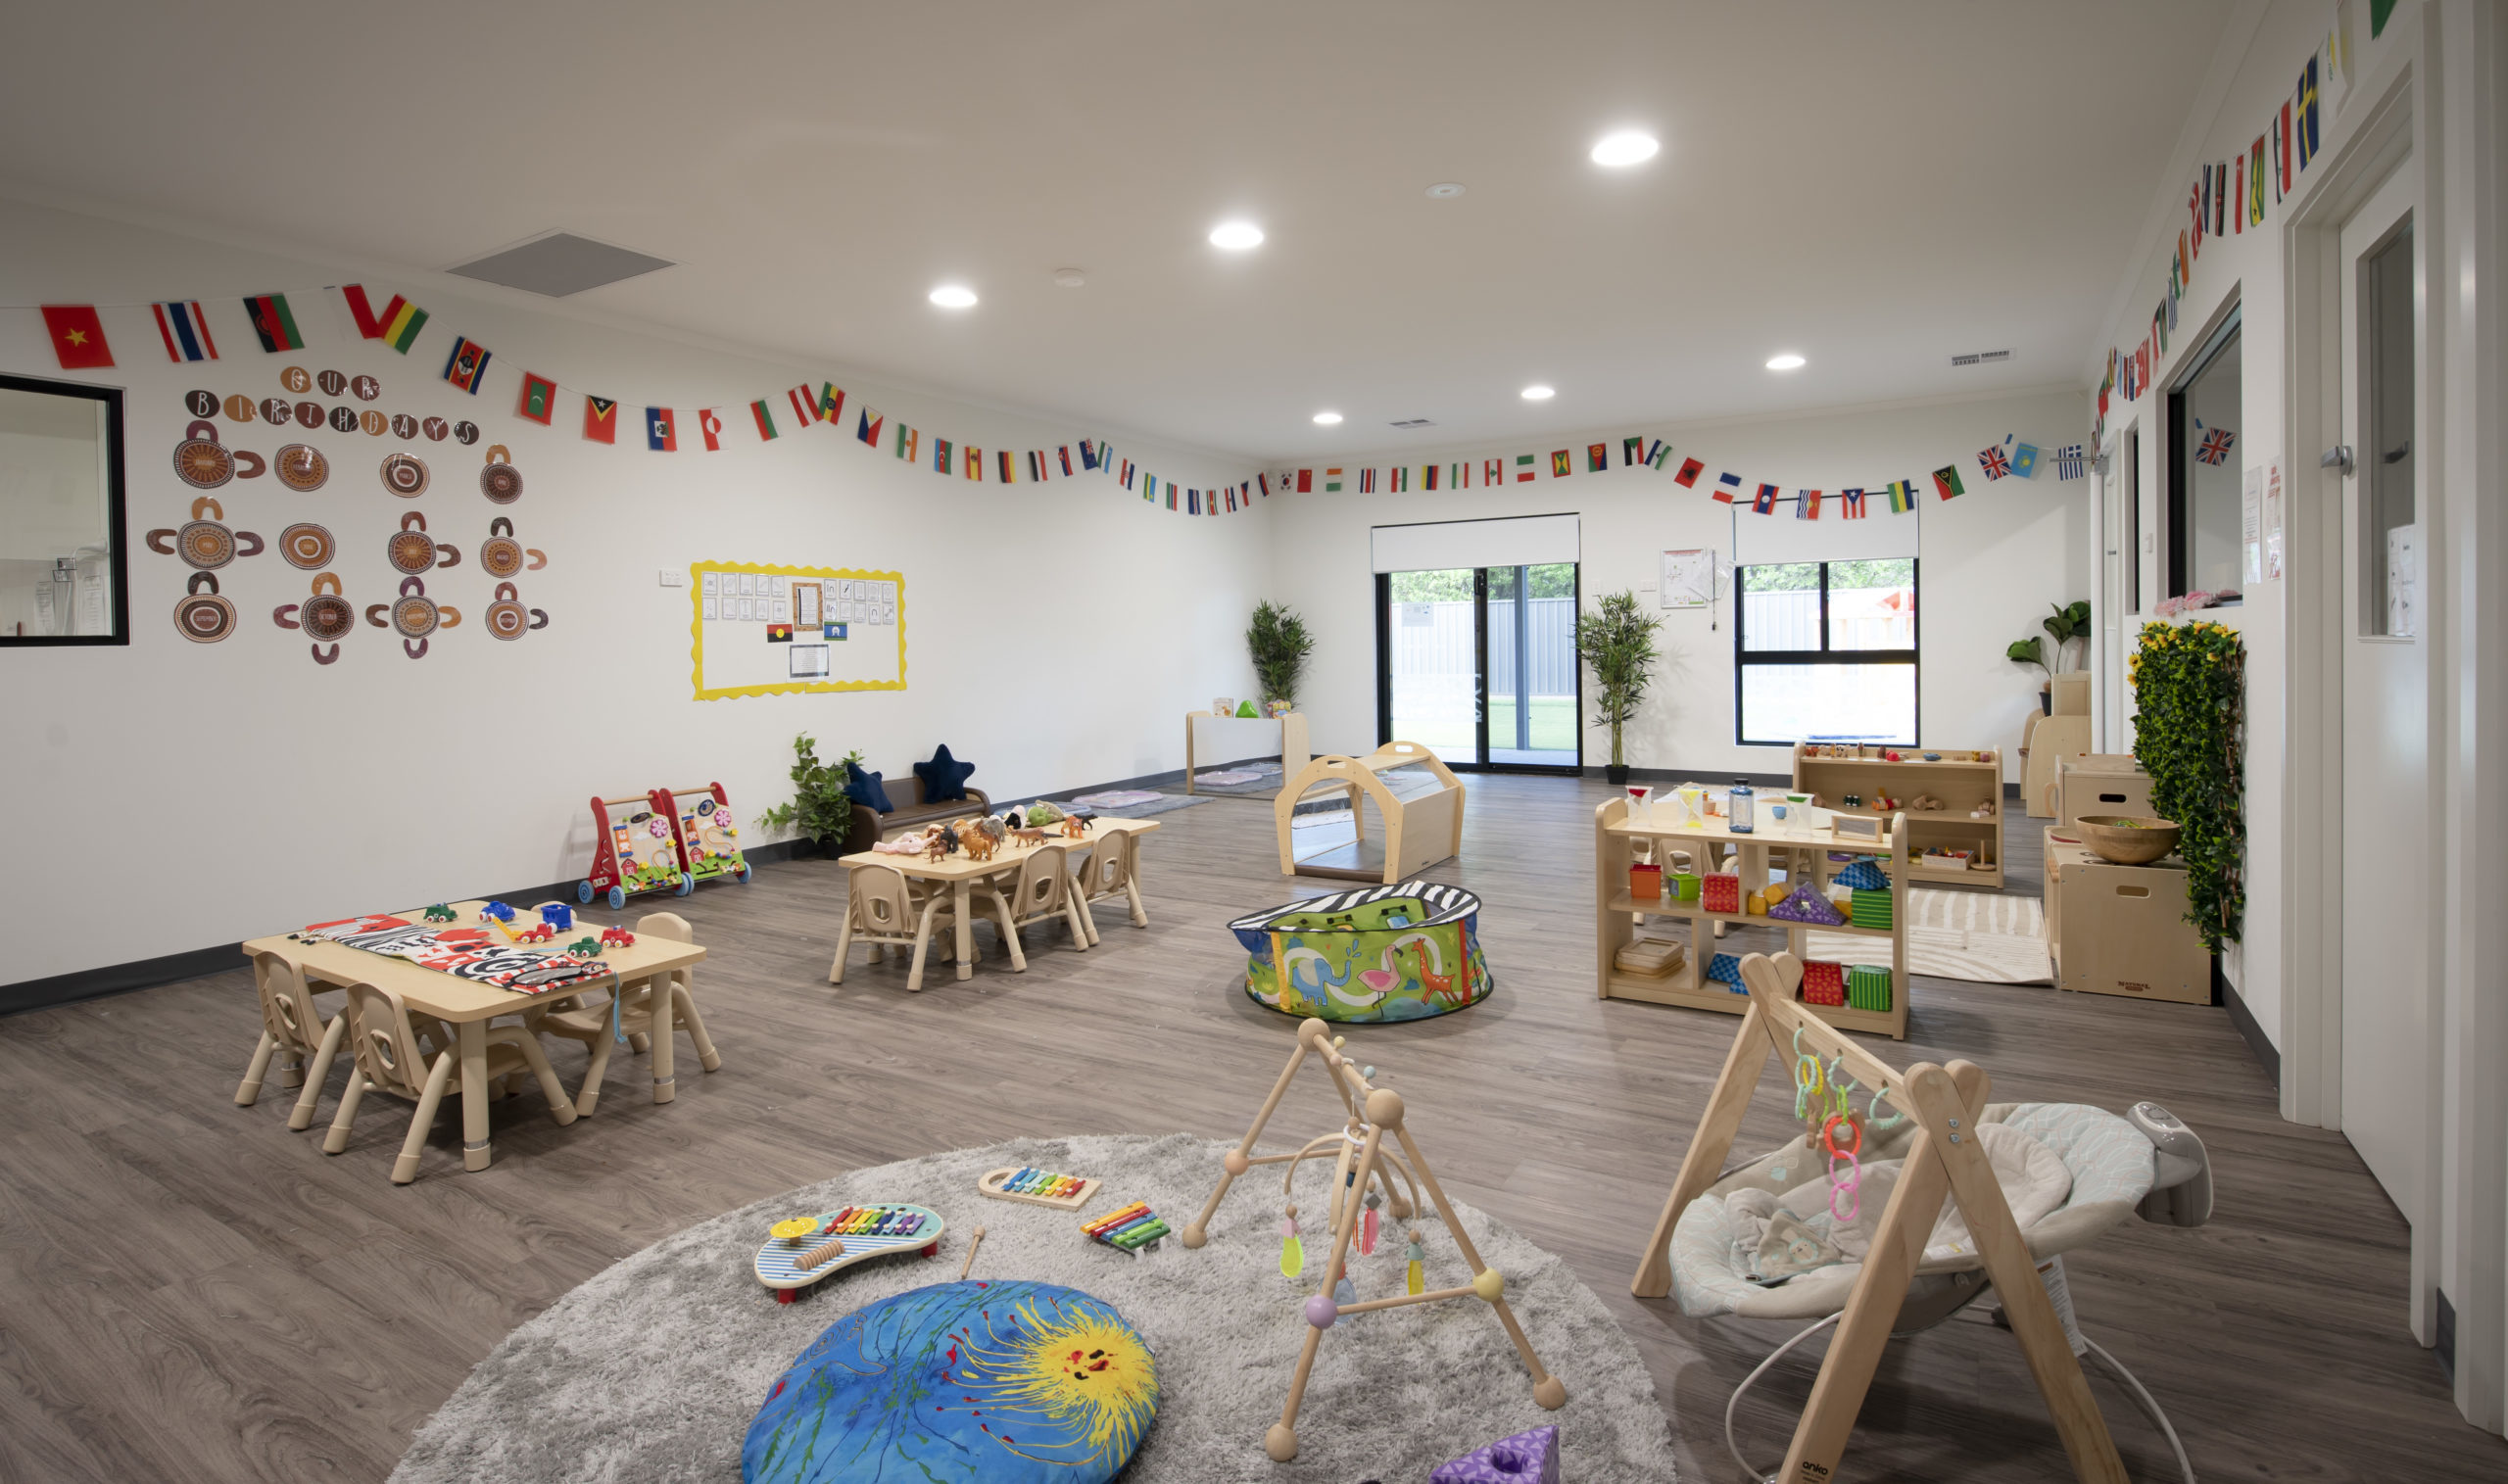 Edge Early Learning Munno Para West